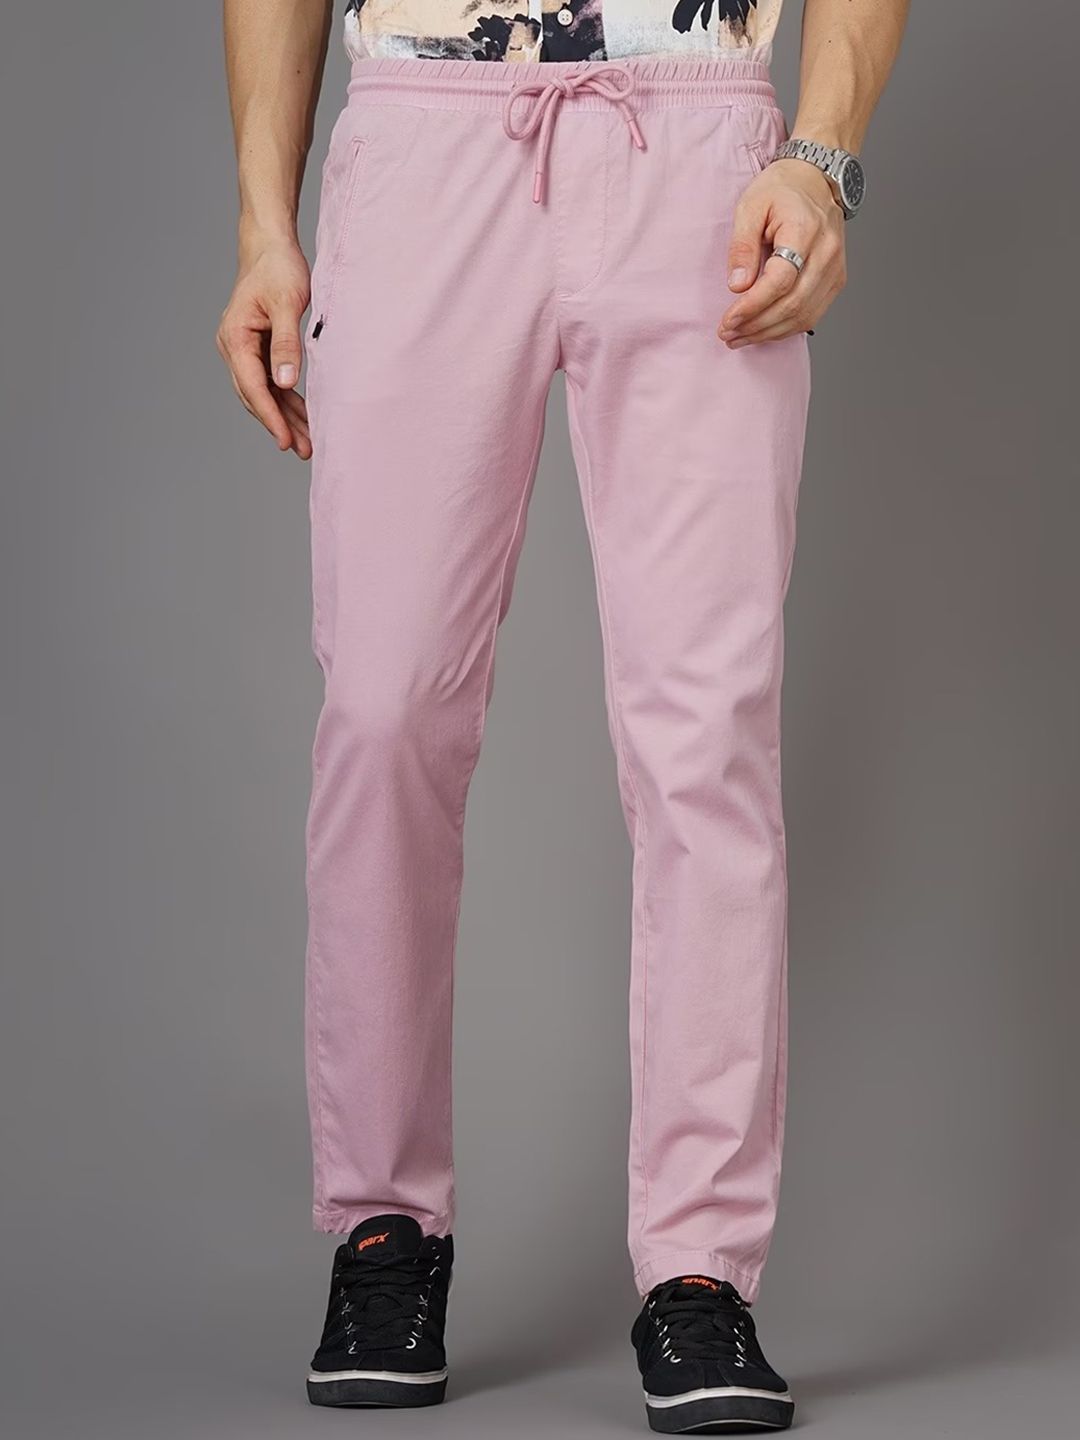 Buy Exclusive BRITISH CLUB Formal Trousers  Men  7 products  FASHIOLAin